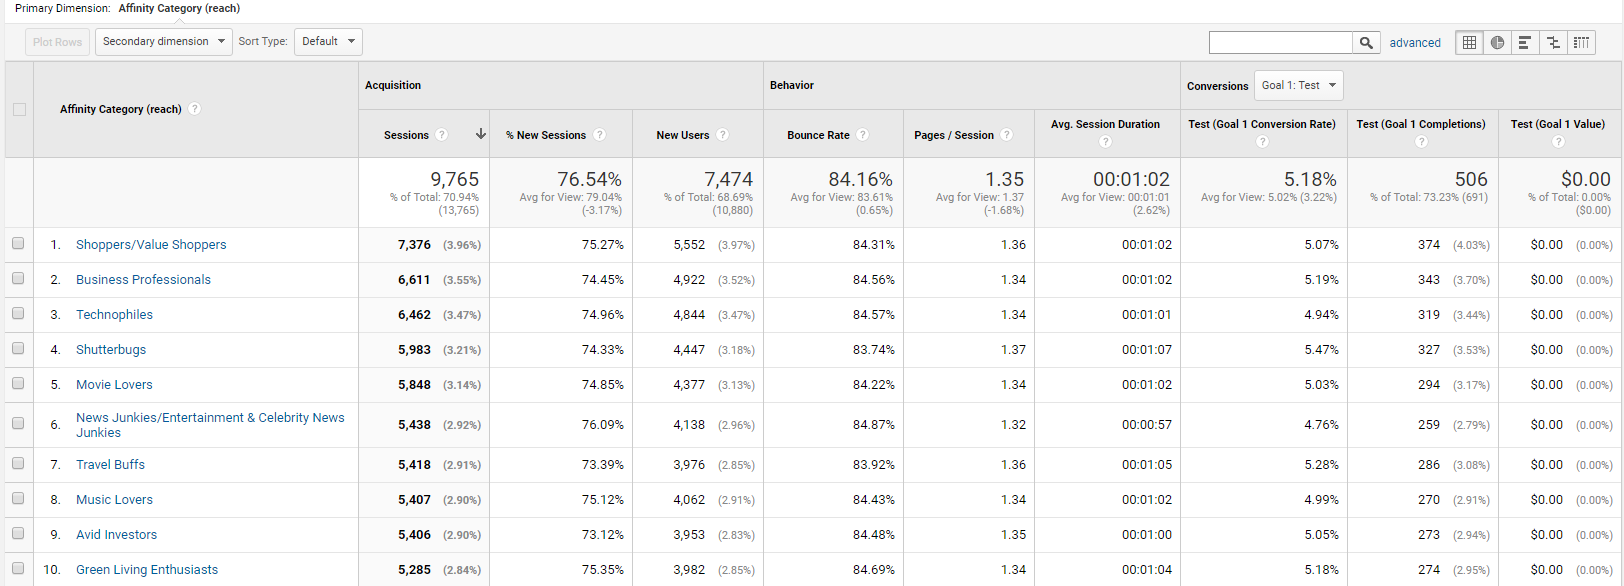 Google Analytics allows you to build categories for visitors to your site